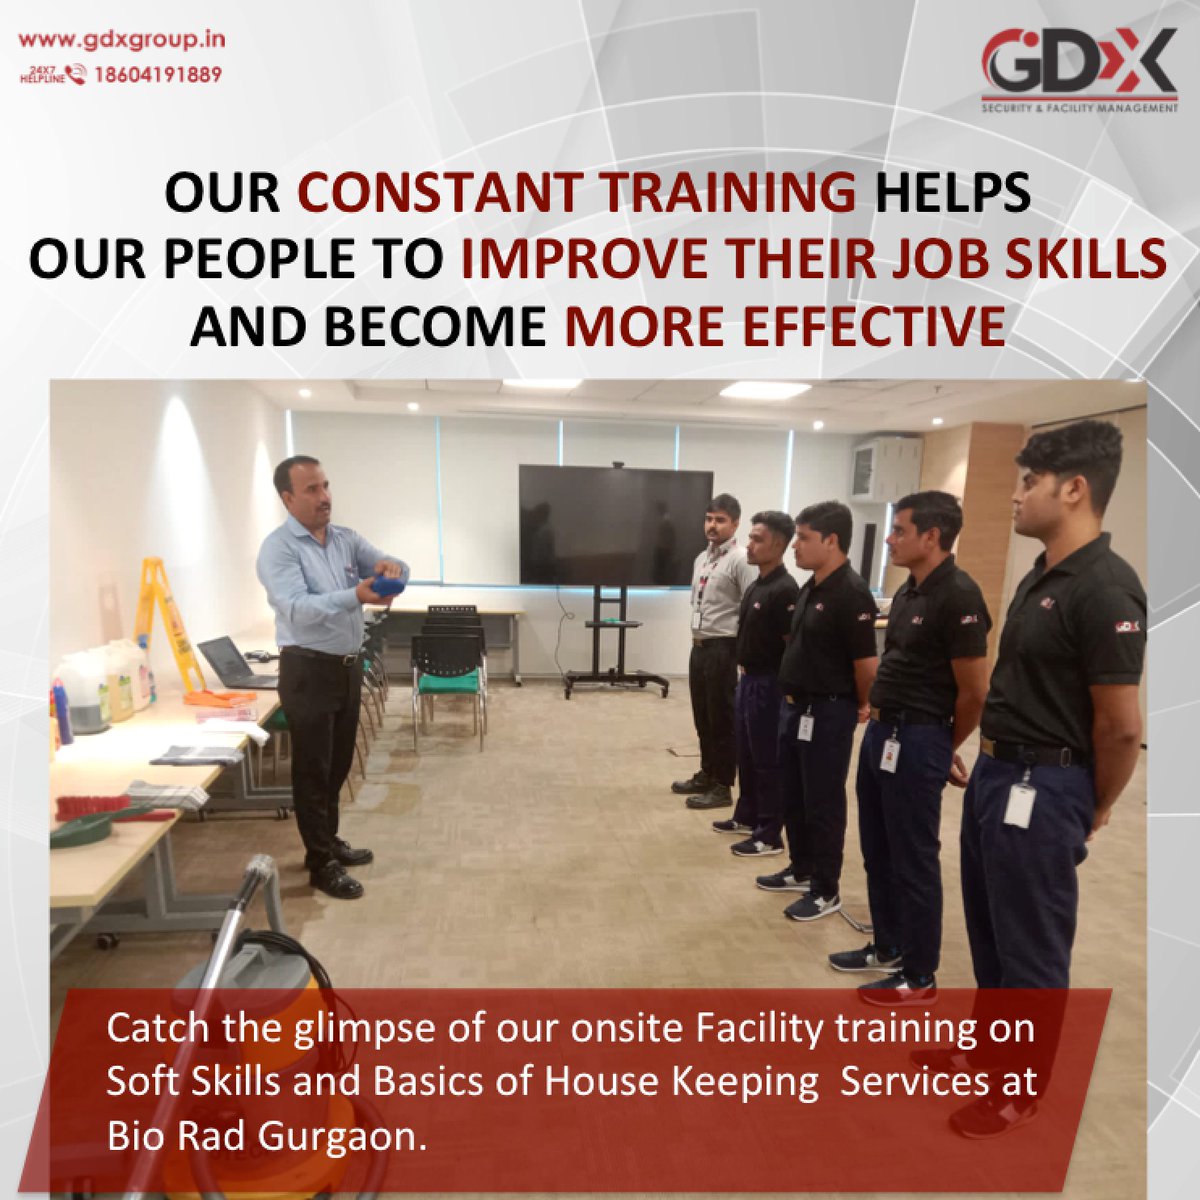 Catch the glimpse of our onsite Facility training on Soft Skills and Basics of House Keeping  Services at Bio Rad Gurgaon. #GDXGroup #GDXtech #GDXuniqueservices #GDX37YearsofServiceExcellence #SecurityServices #GDXtraining